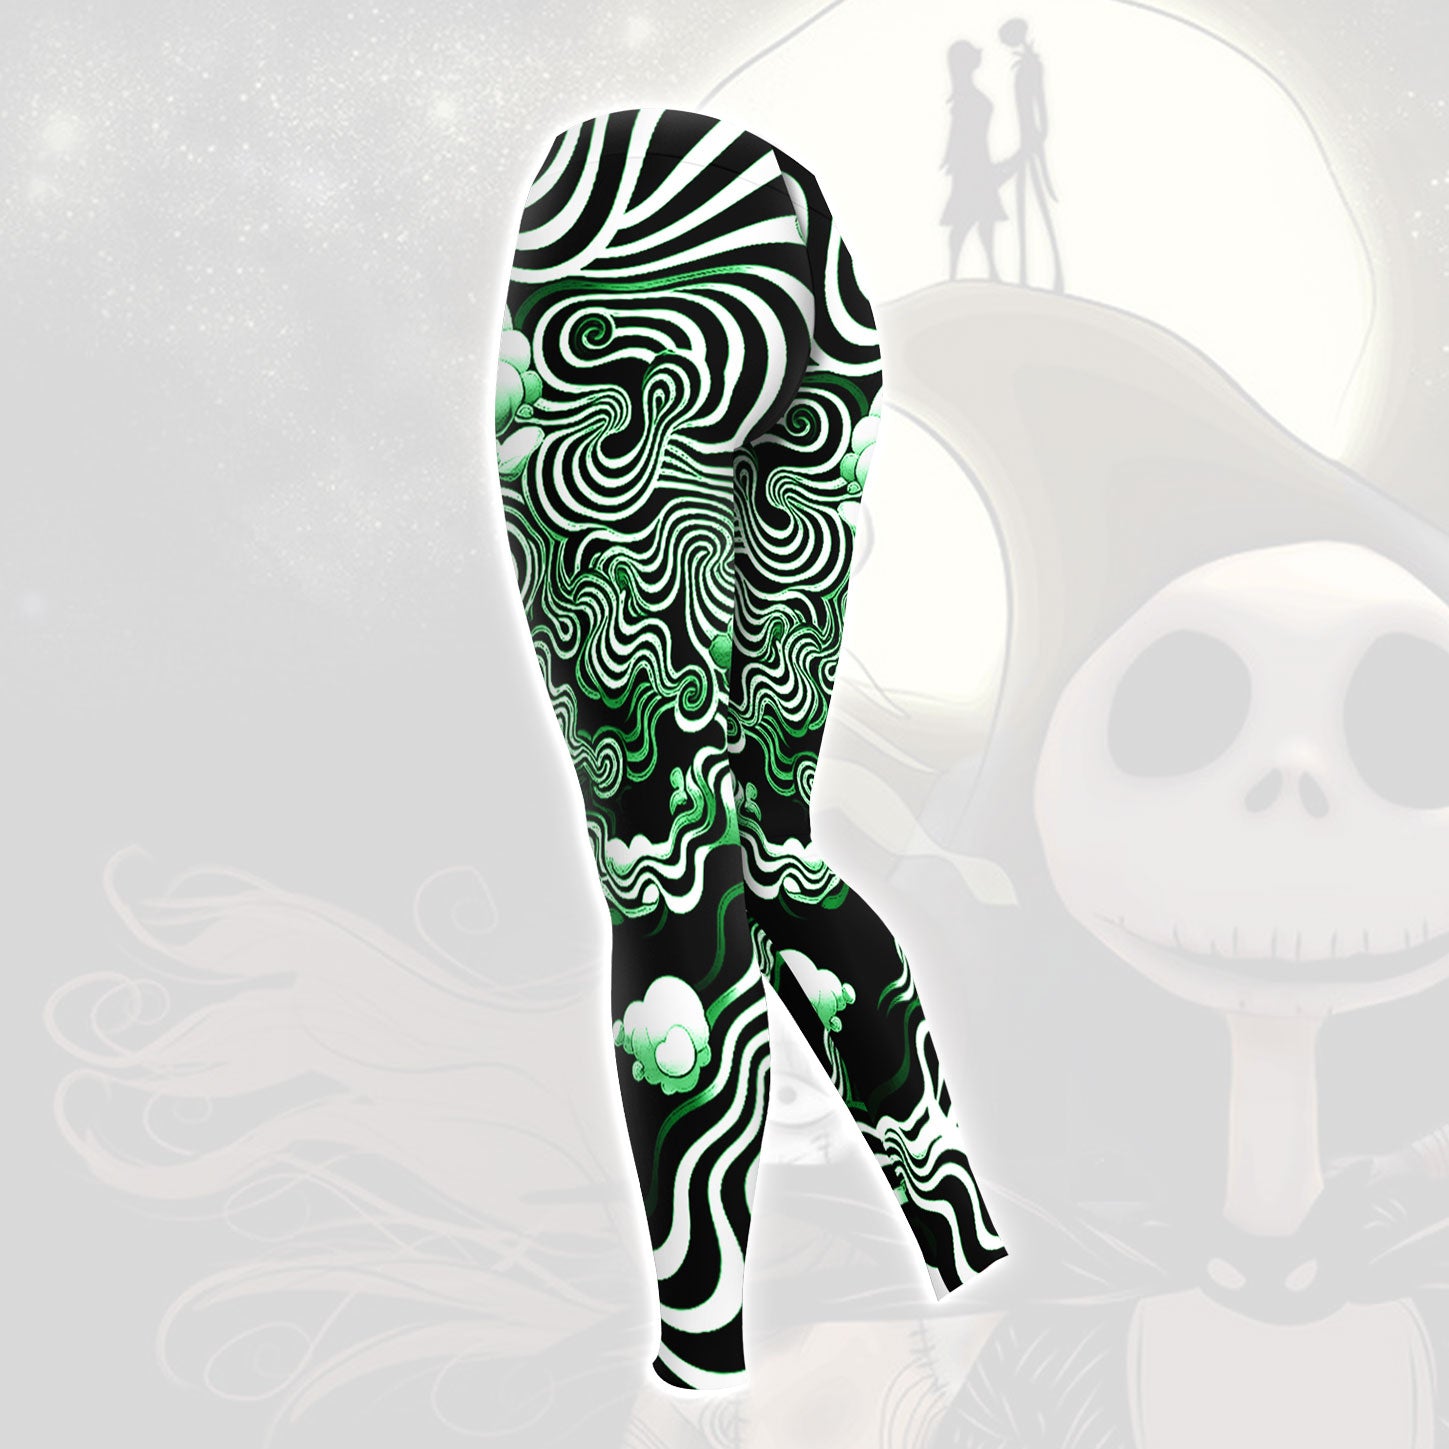 Green Nightmare Art Effect Combo Hoodie and Leggings - Dark and edgy matching set with skull designs for a unique and stylish look